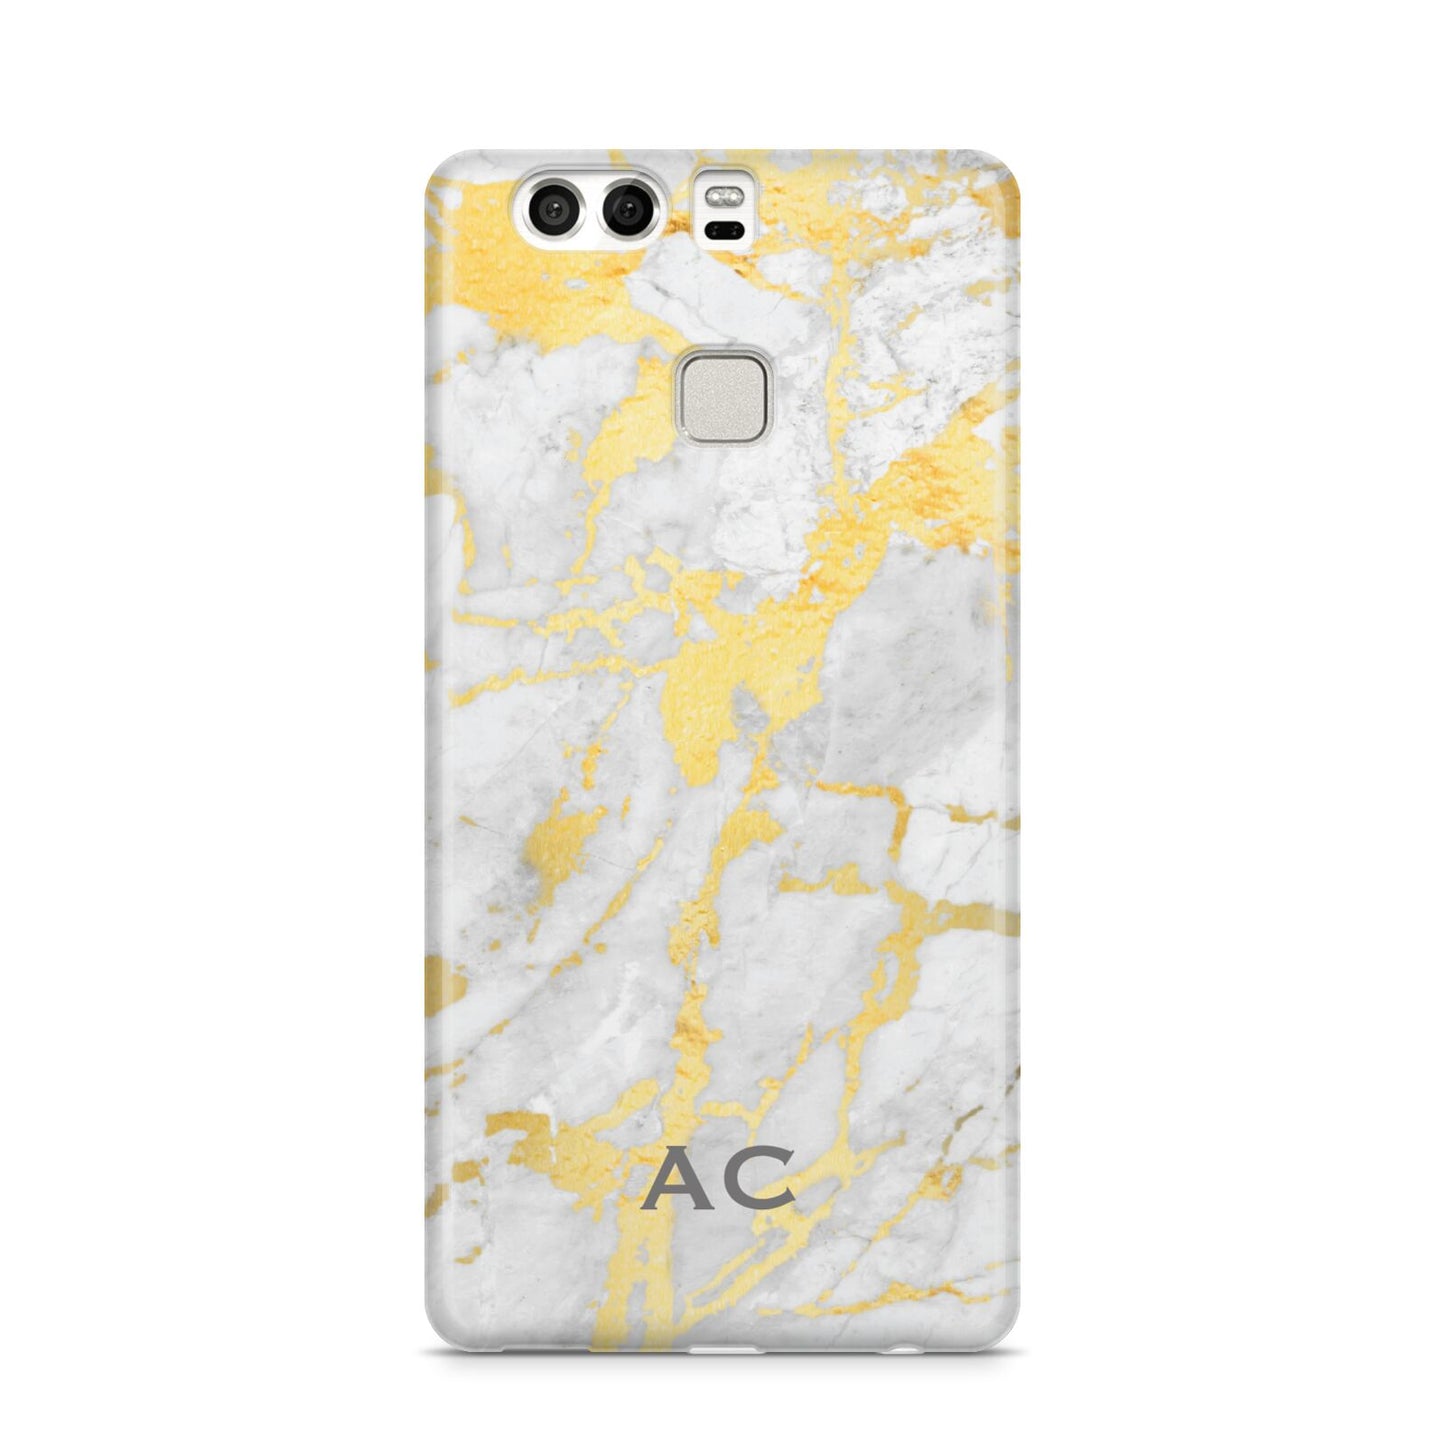 Personalised Gold Marble Initials Huawei P9 Case